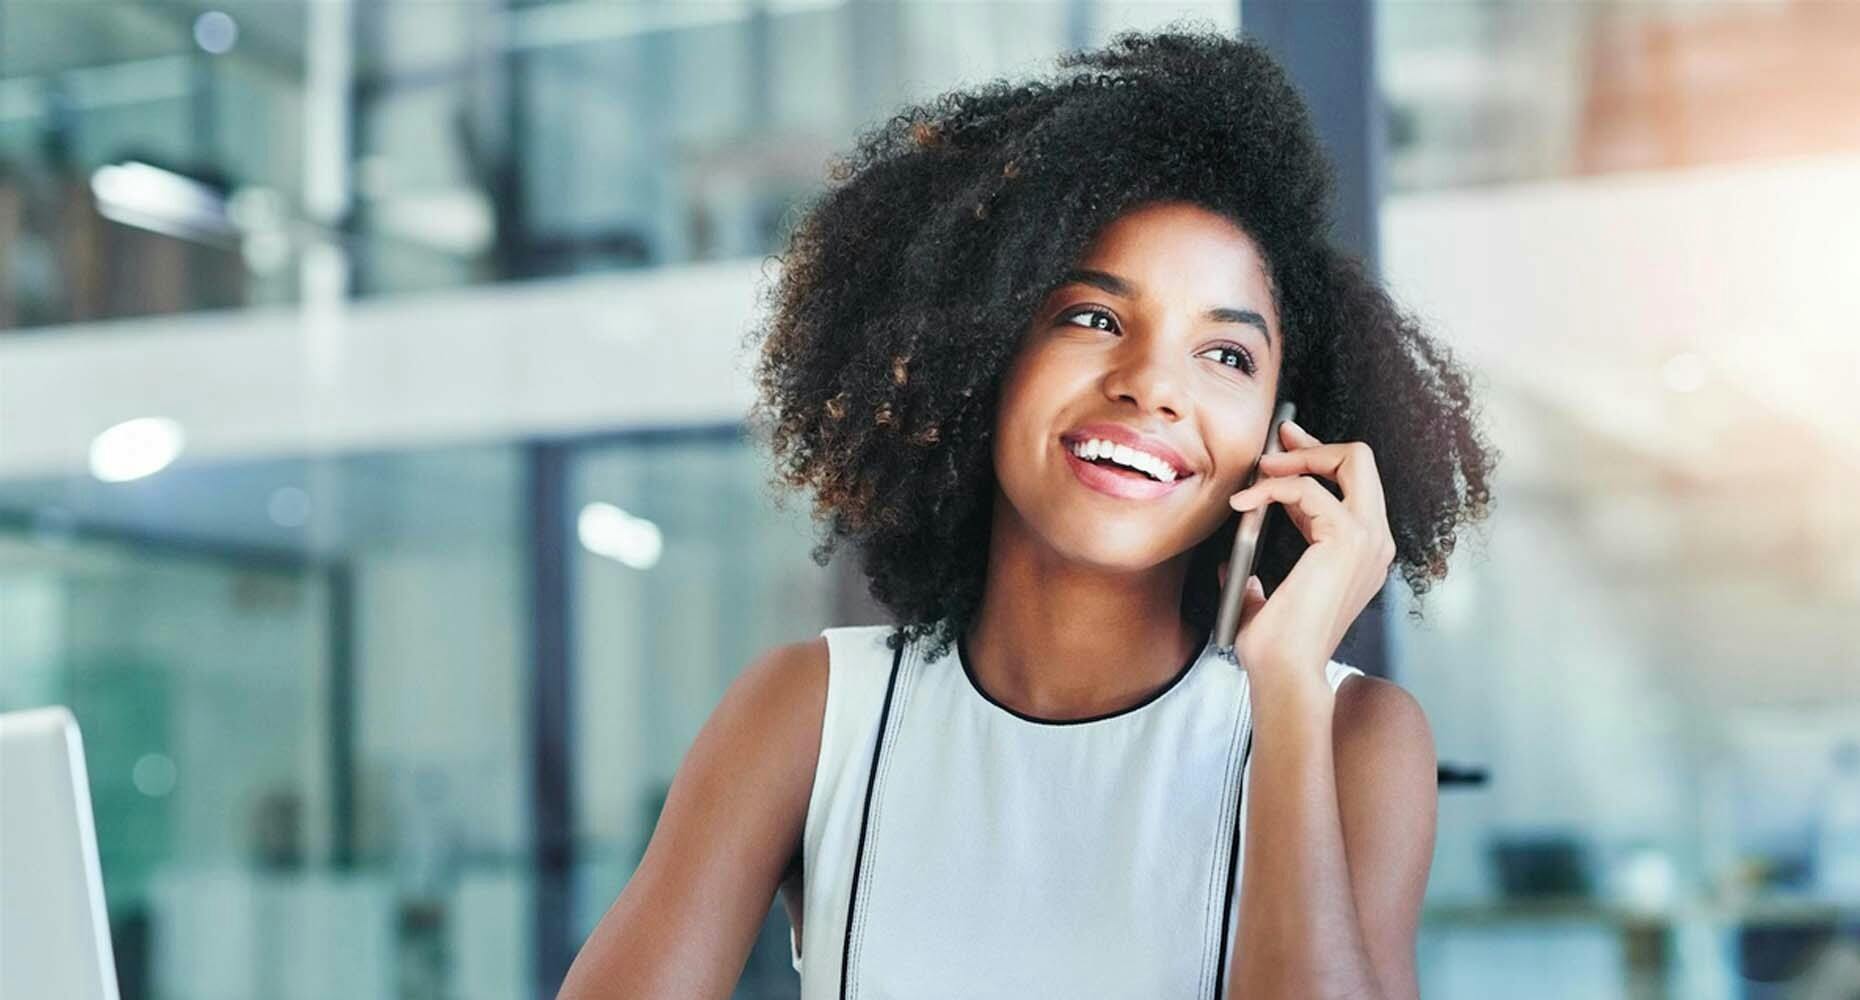 Sales woman smiling on the phone